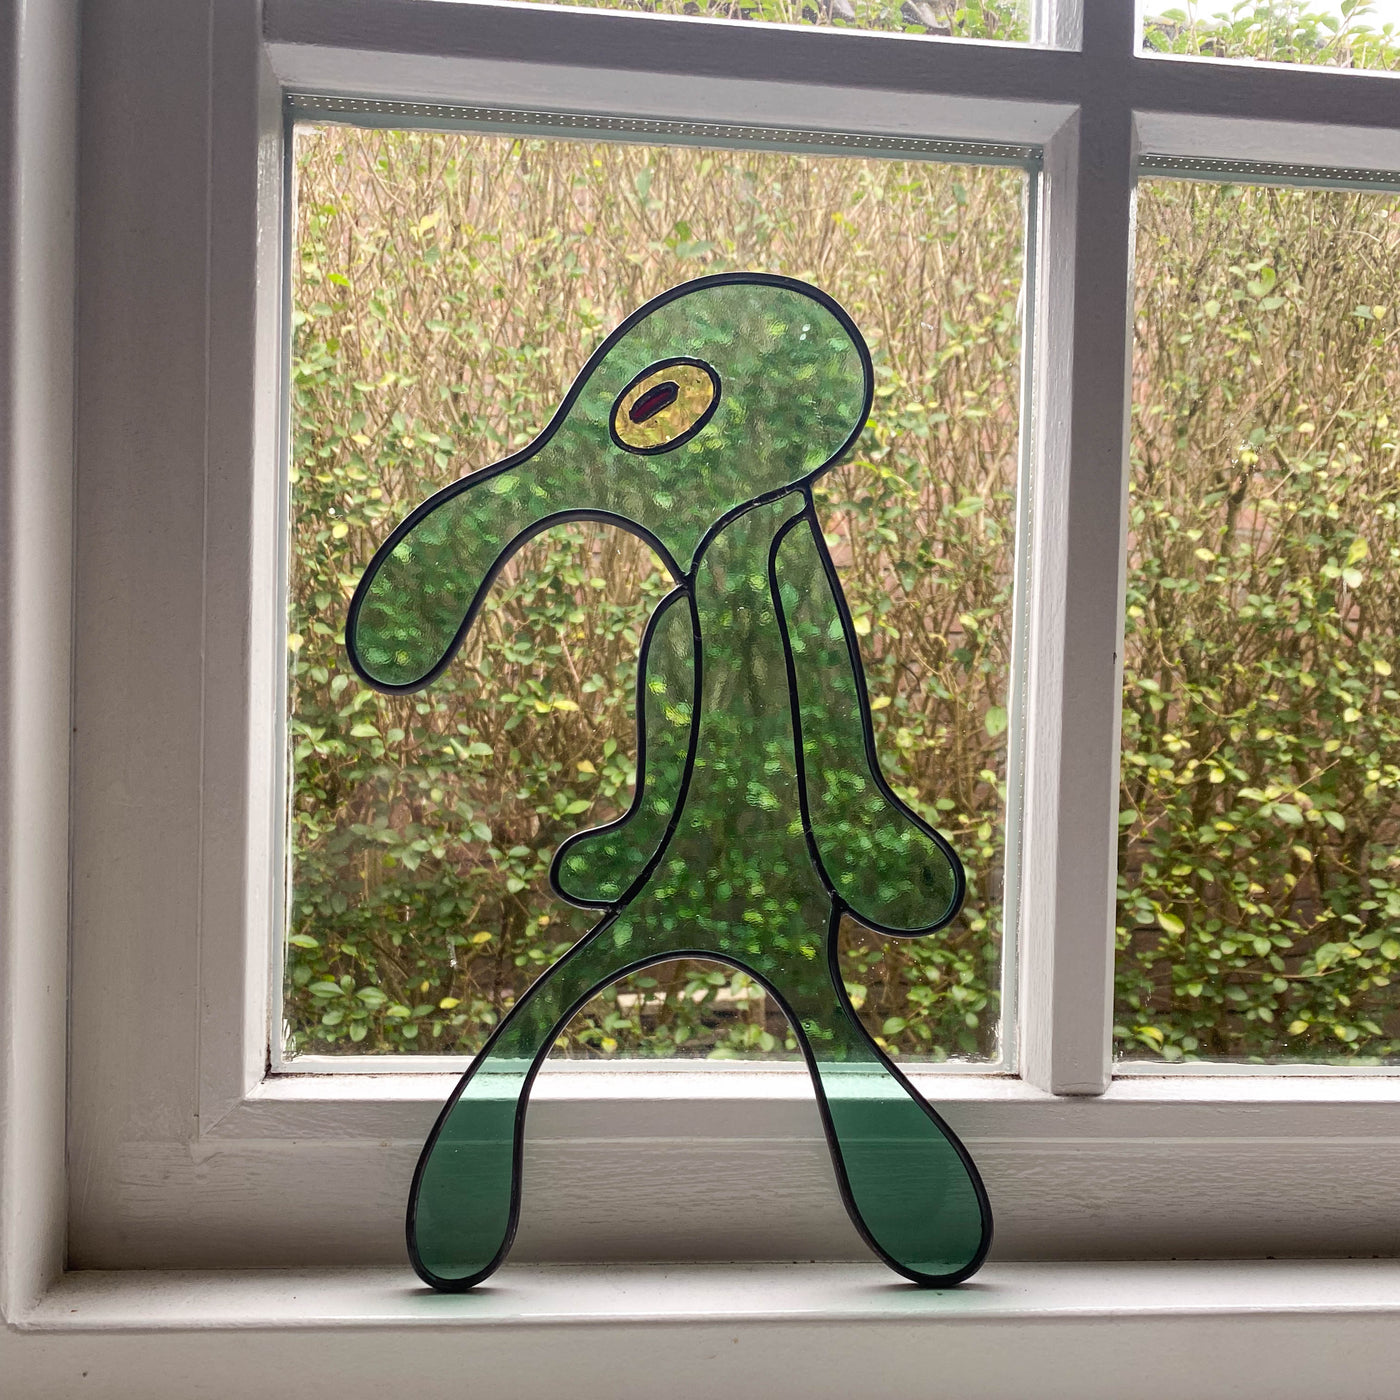 Squidward's Painting Inspired Stained Glass Pattern